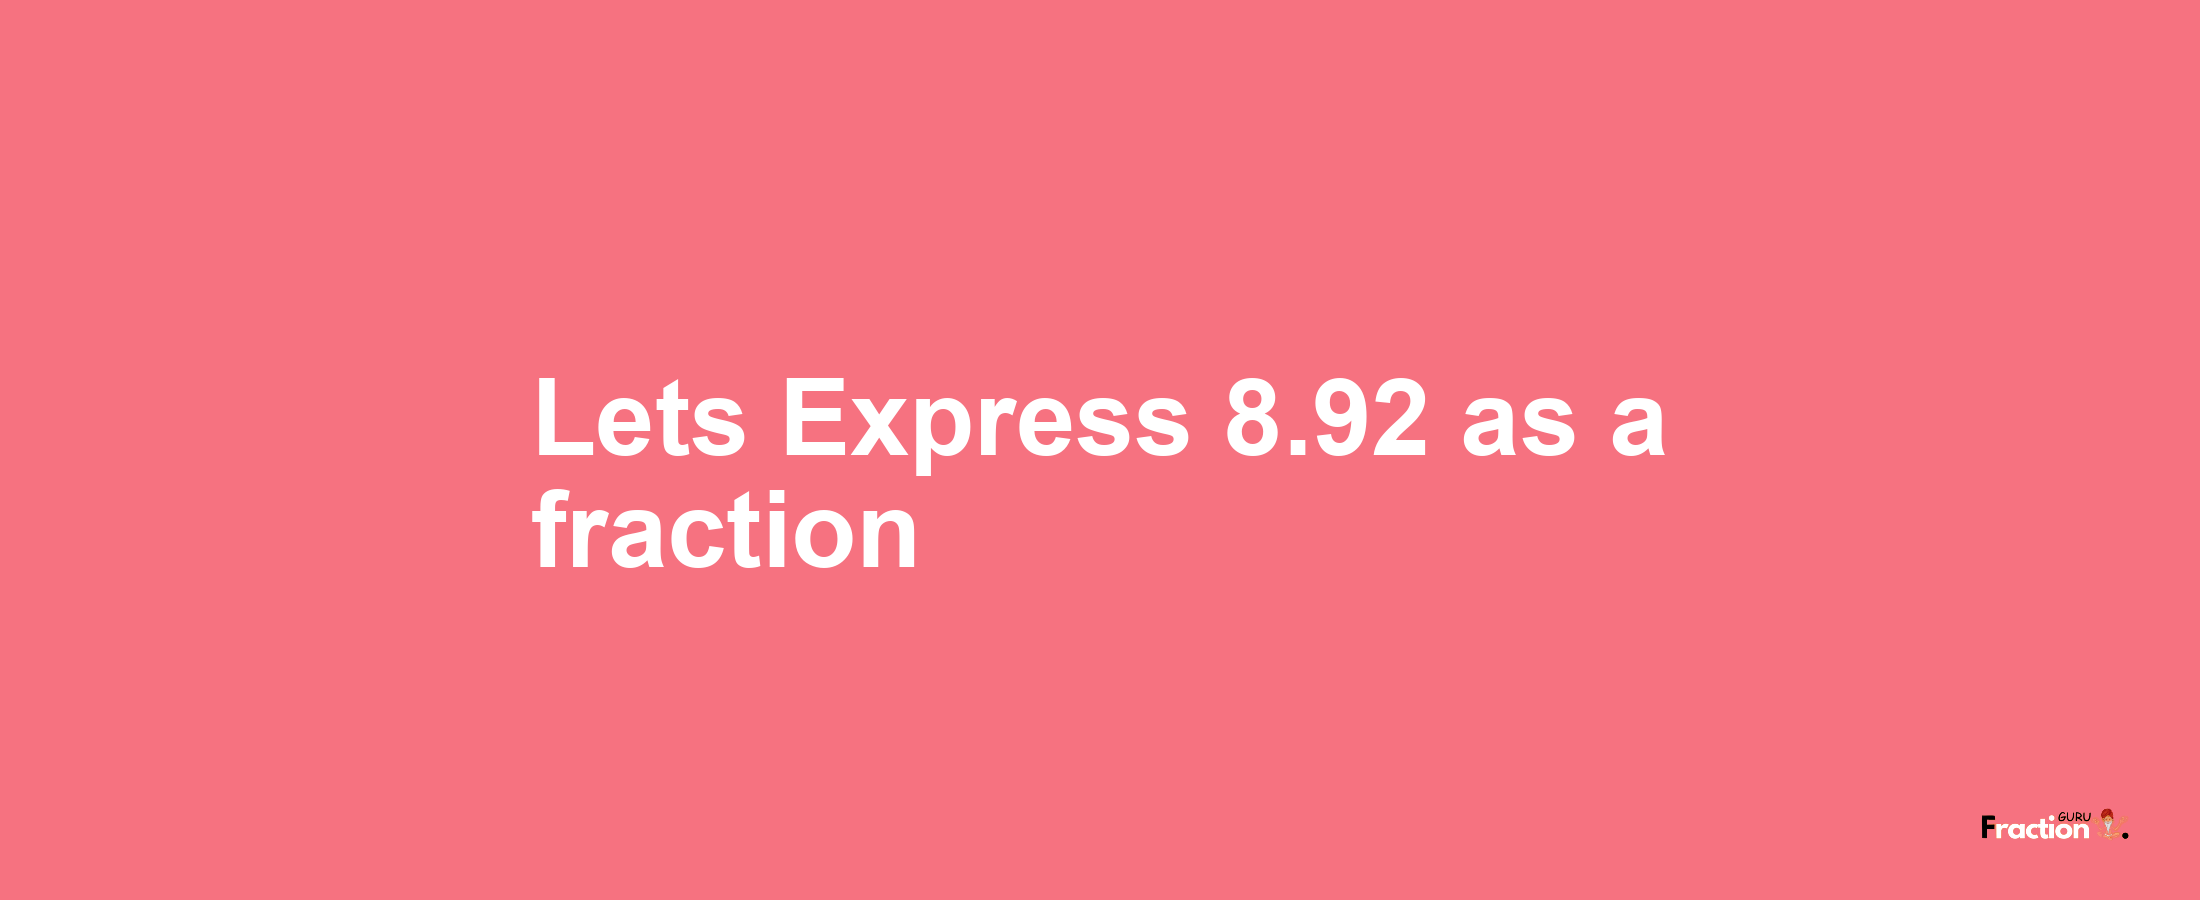 Lets Express 8.92 as afraction